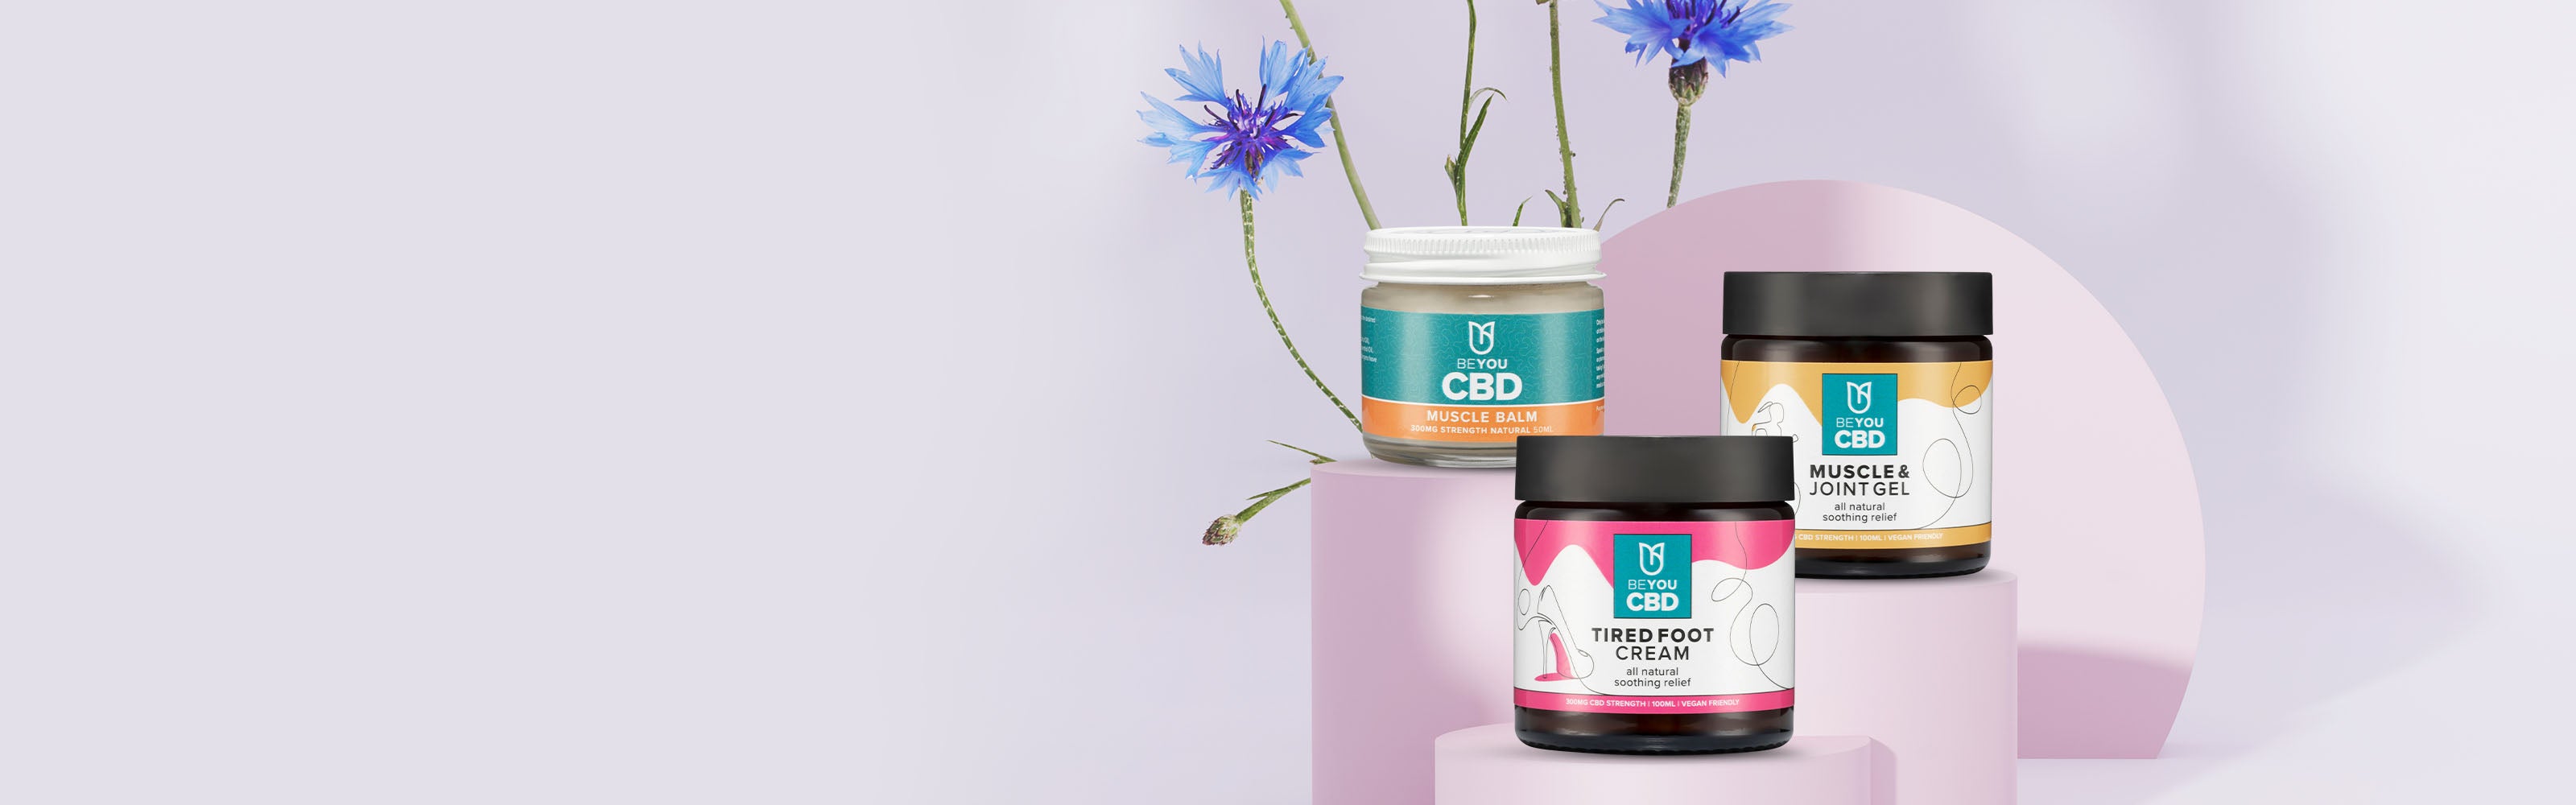 CBD for pain in the body - whether you have painful muscles and joints or just need help with foot pain the BeYou CBD body care range has a product for you